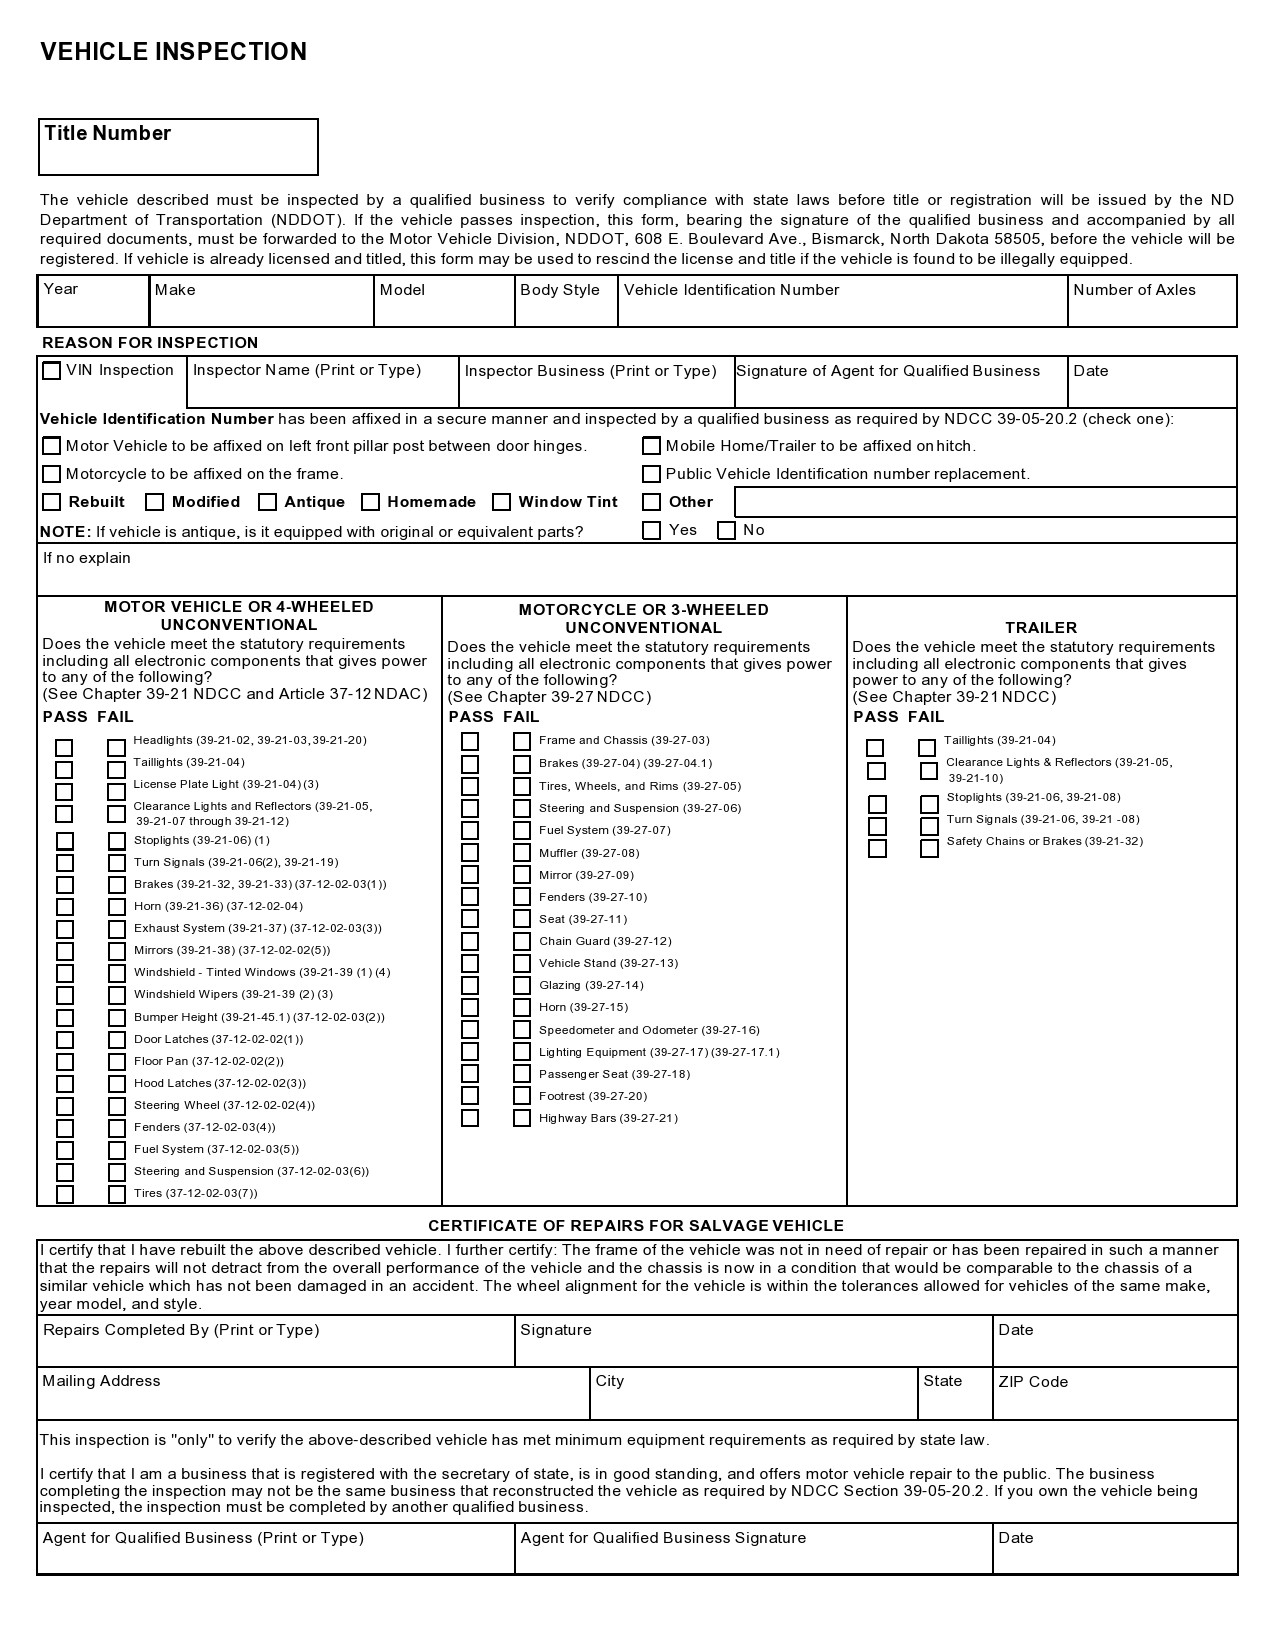 Free vehicle inspection form 22